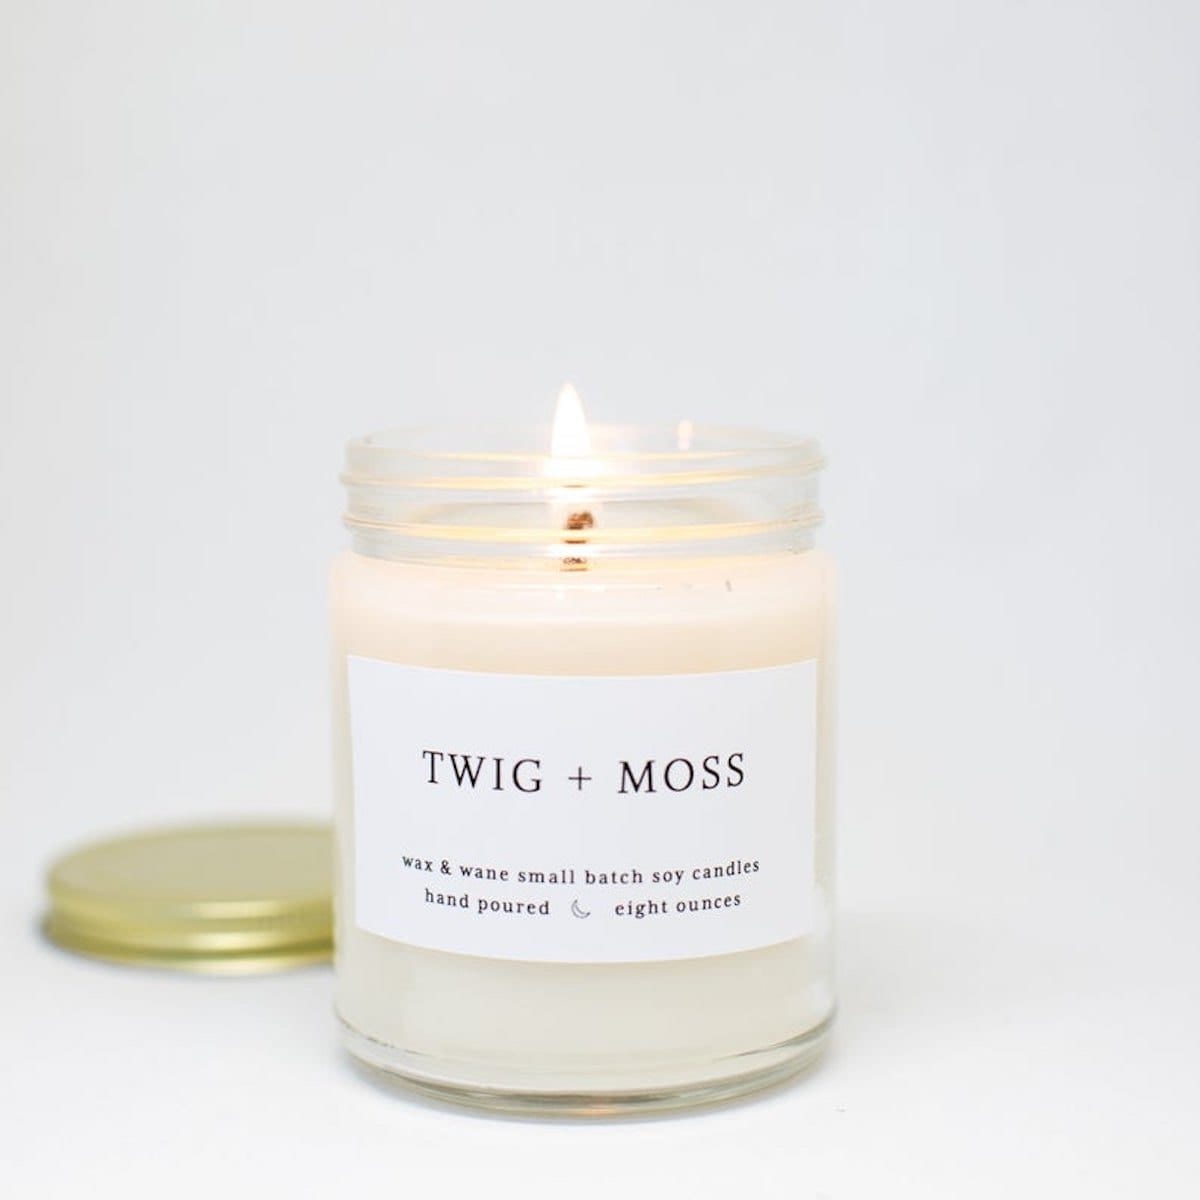 Twig + Moss candle from Wax and Wane on Etsy